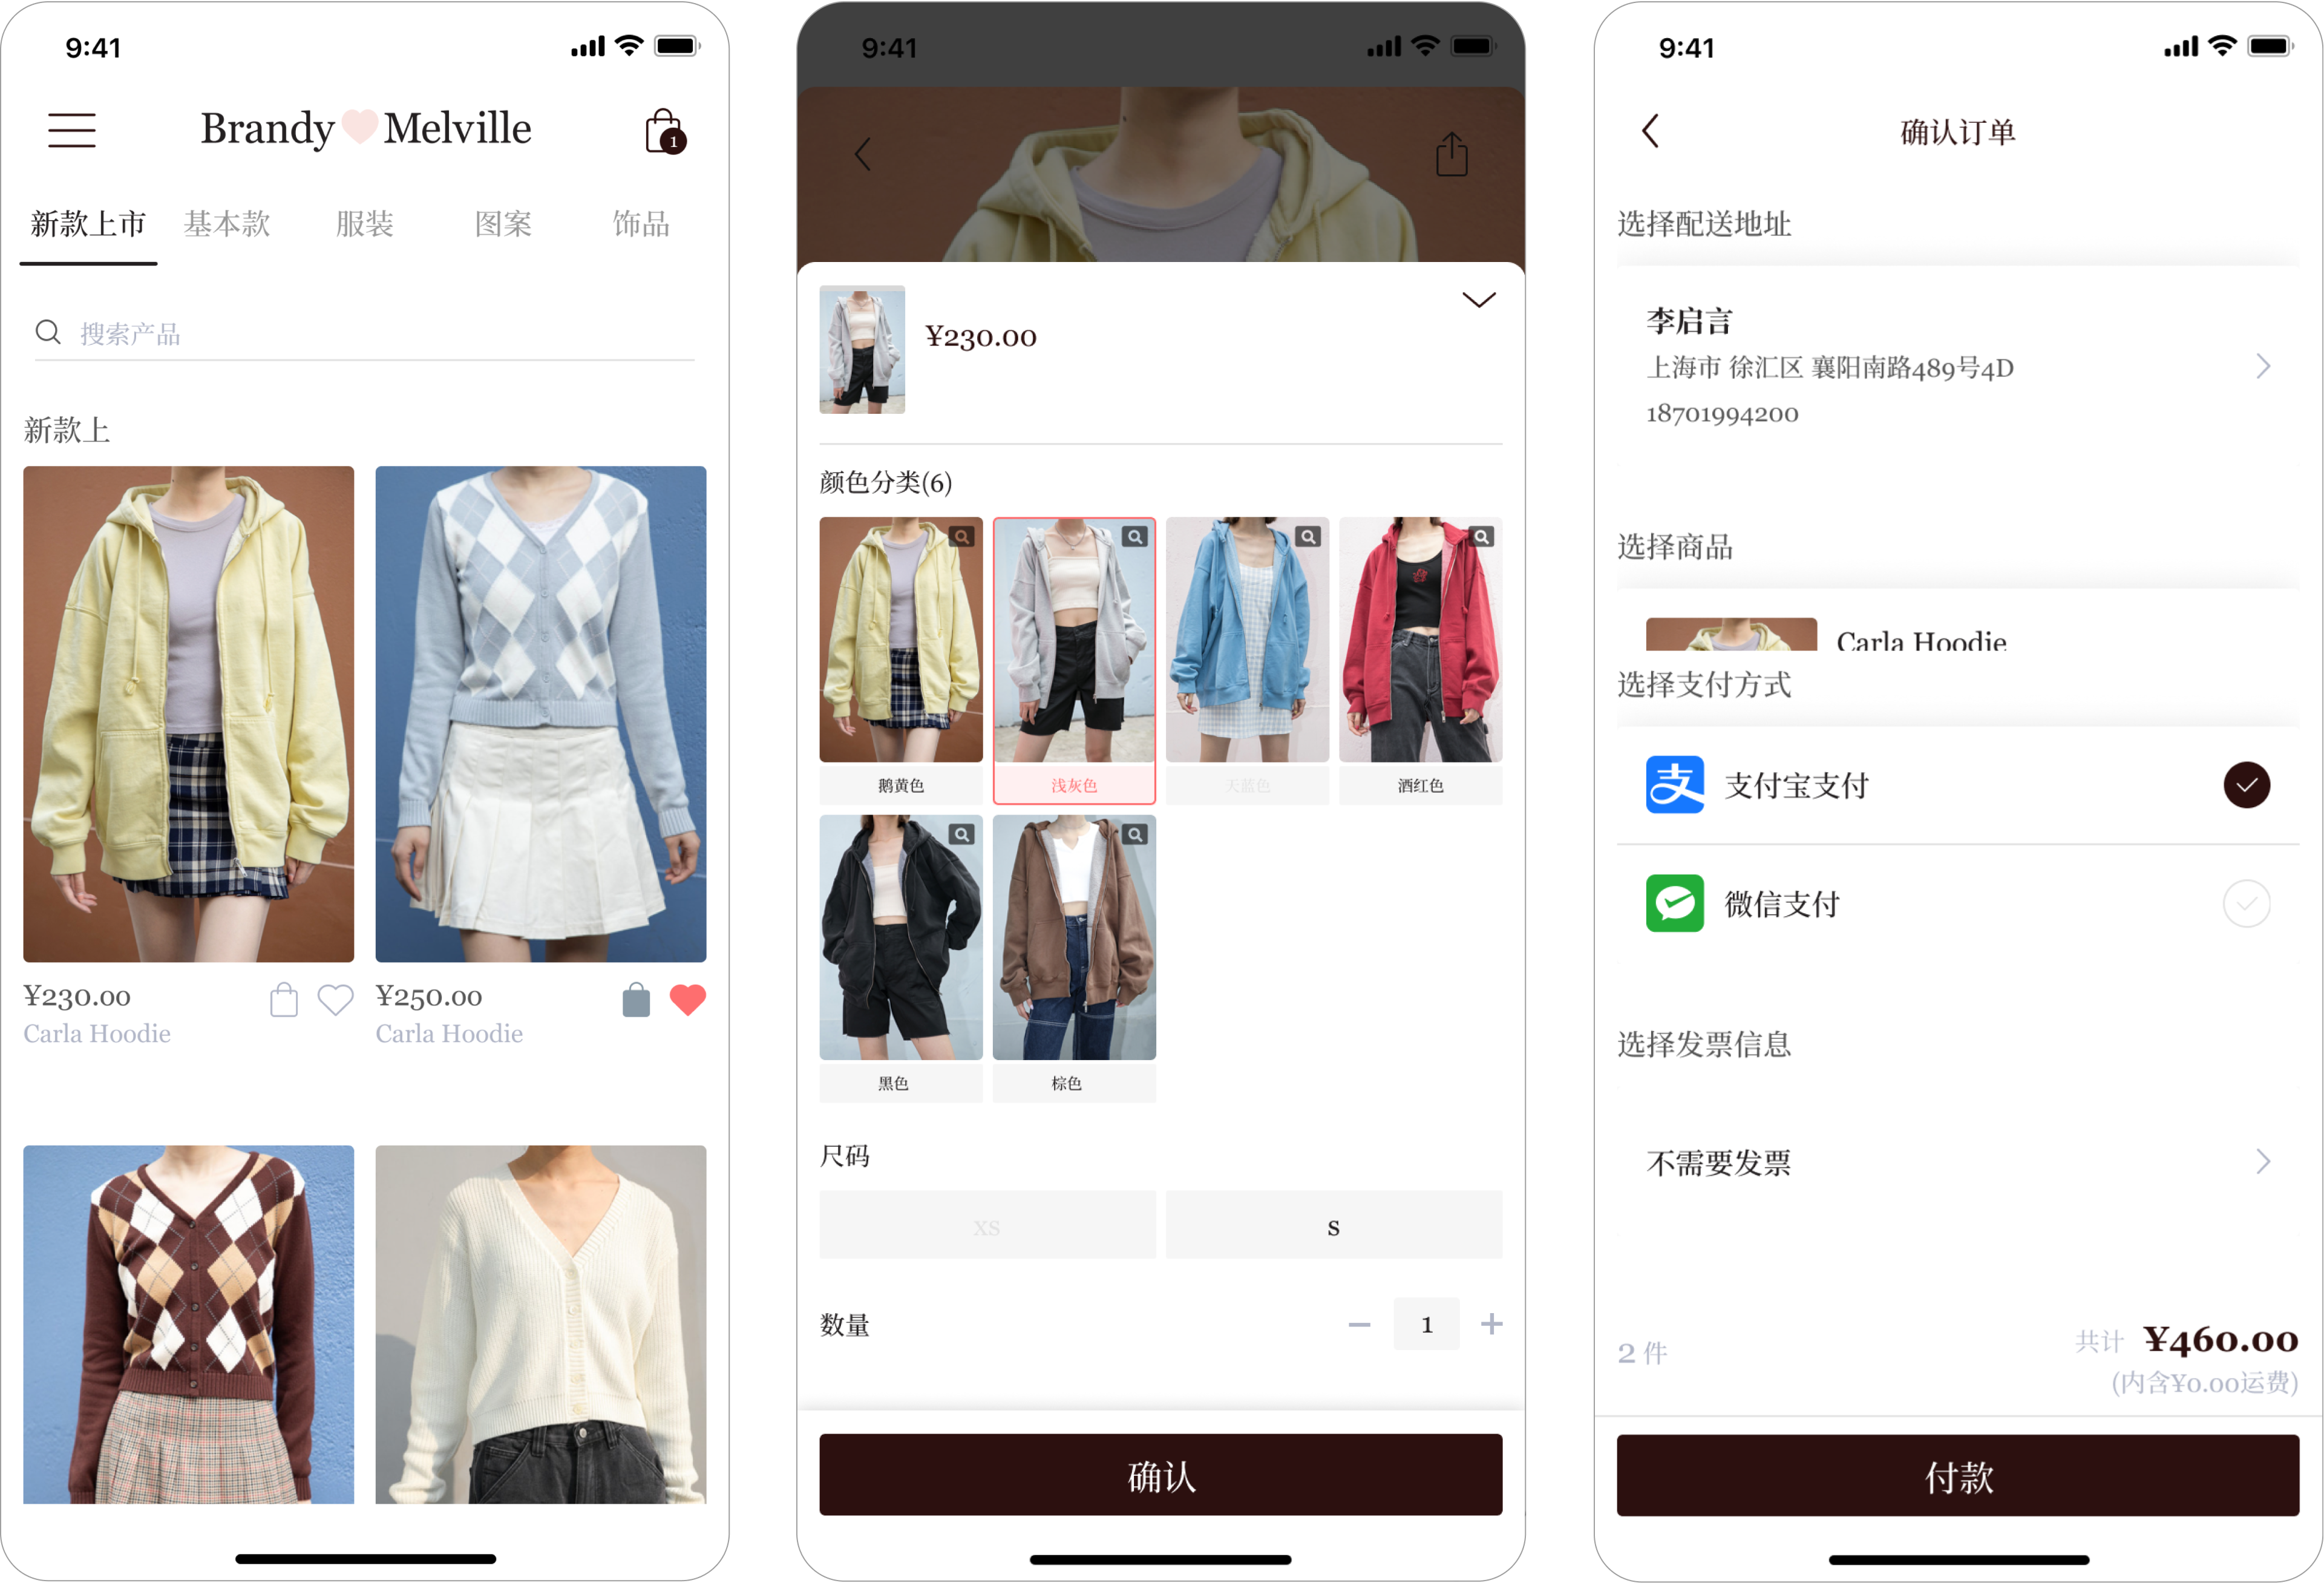 Magento eCommerce application in China for Brandy Melville